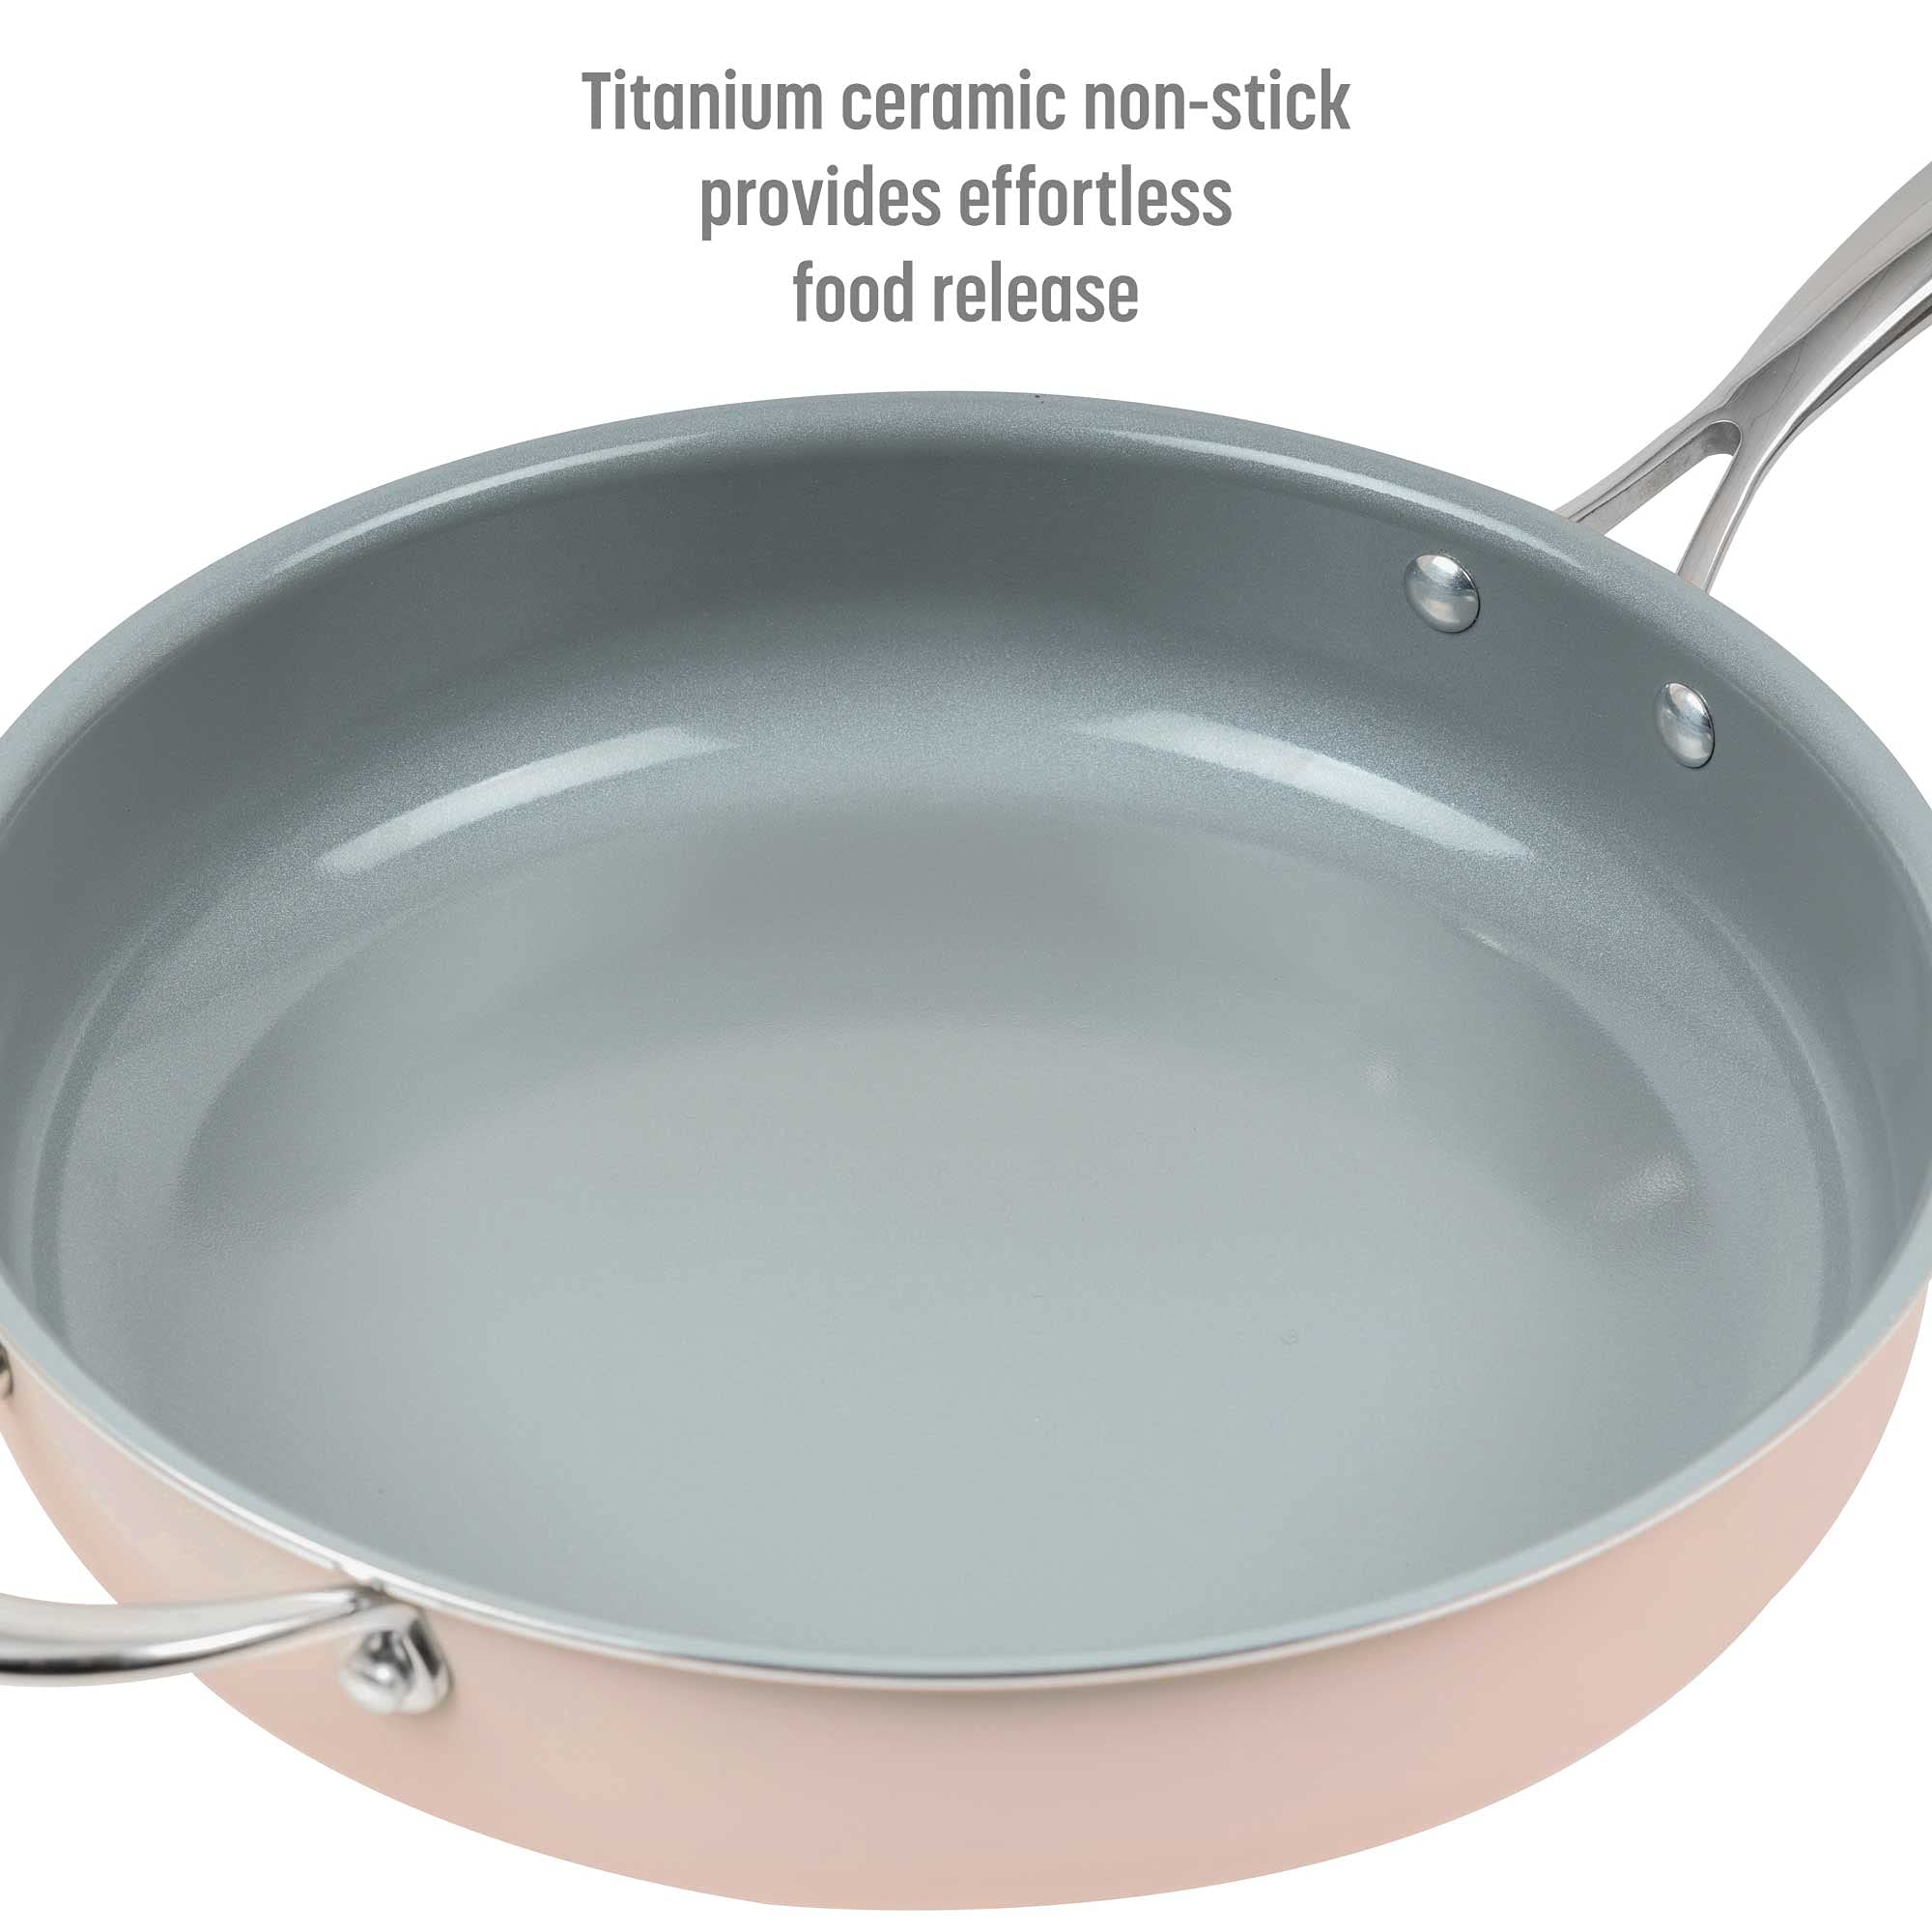 Goodful Ceramic Nonstick 4 Quart Deep Saute Pan with Lid, Dishwasher Safe Pots and Pans, Comfort Grip Stainless Steel Handle, Skillet Frying Pan, Made without PFOA, Blush